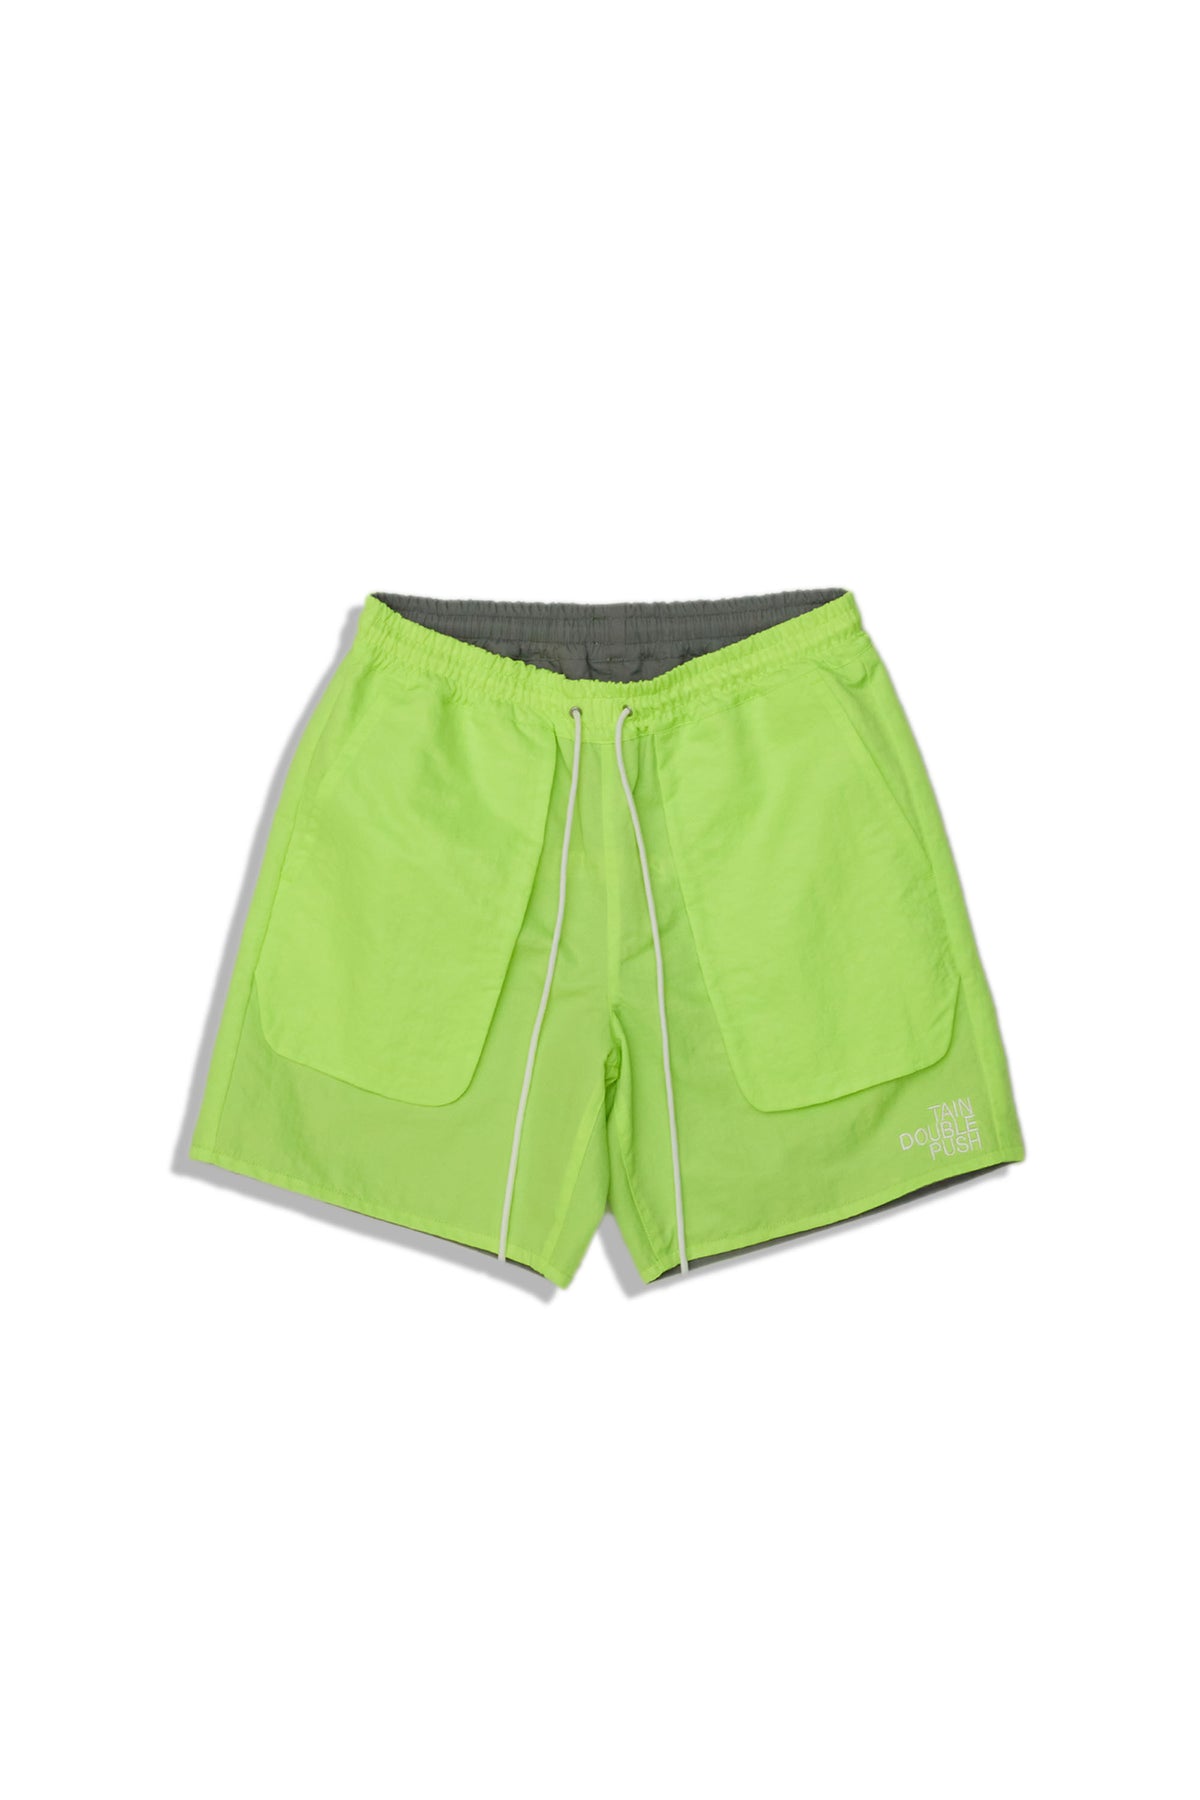 REVIVE MANY TIMES REVERSIBLE SHORTS / GRY/YEL